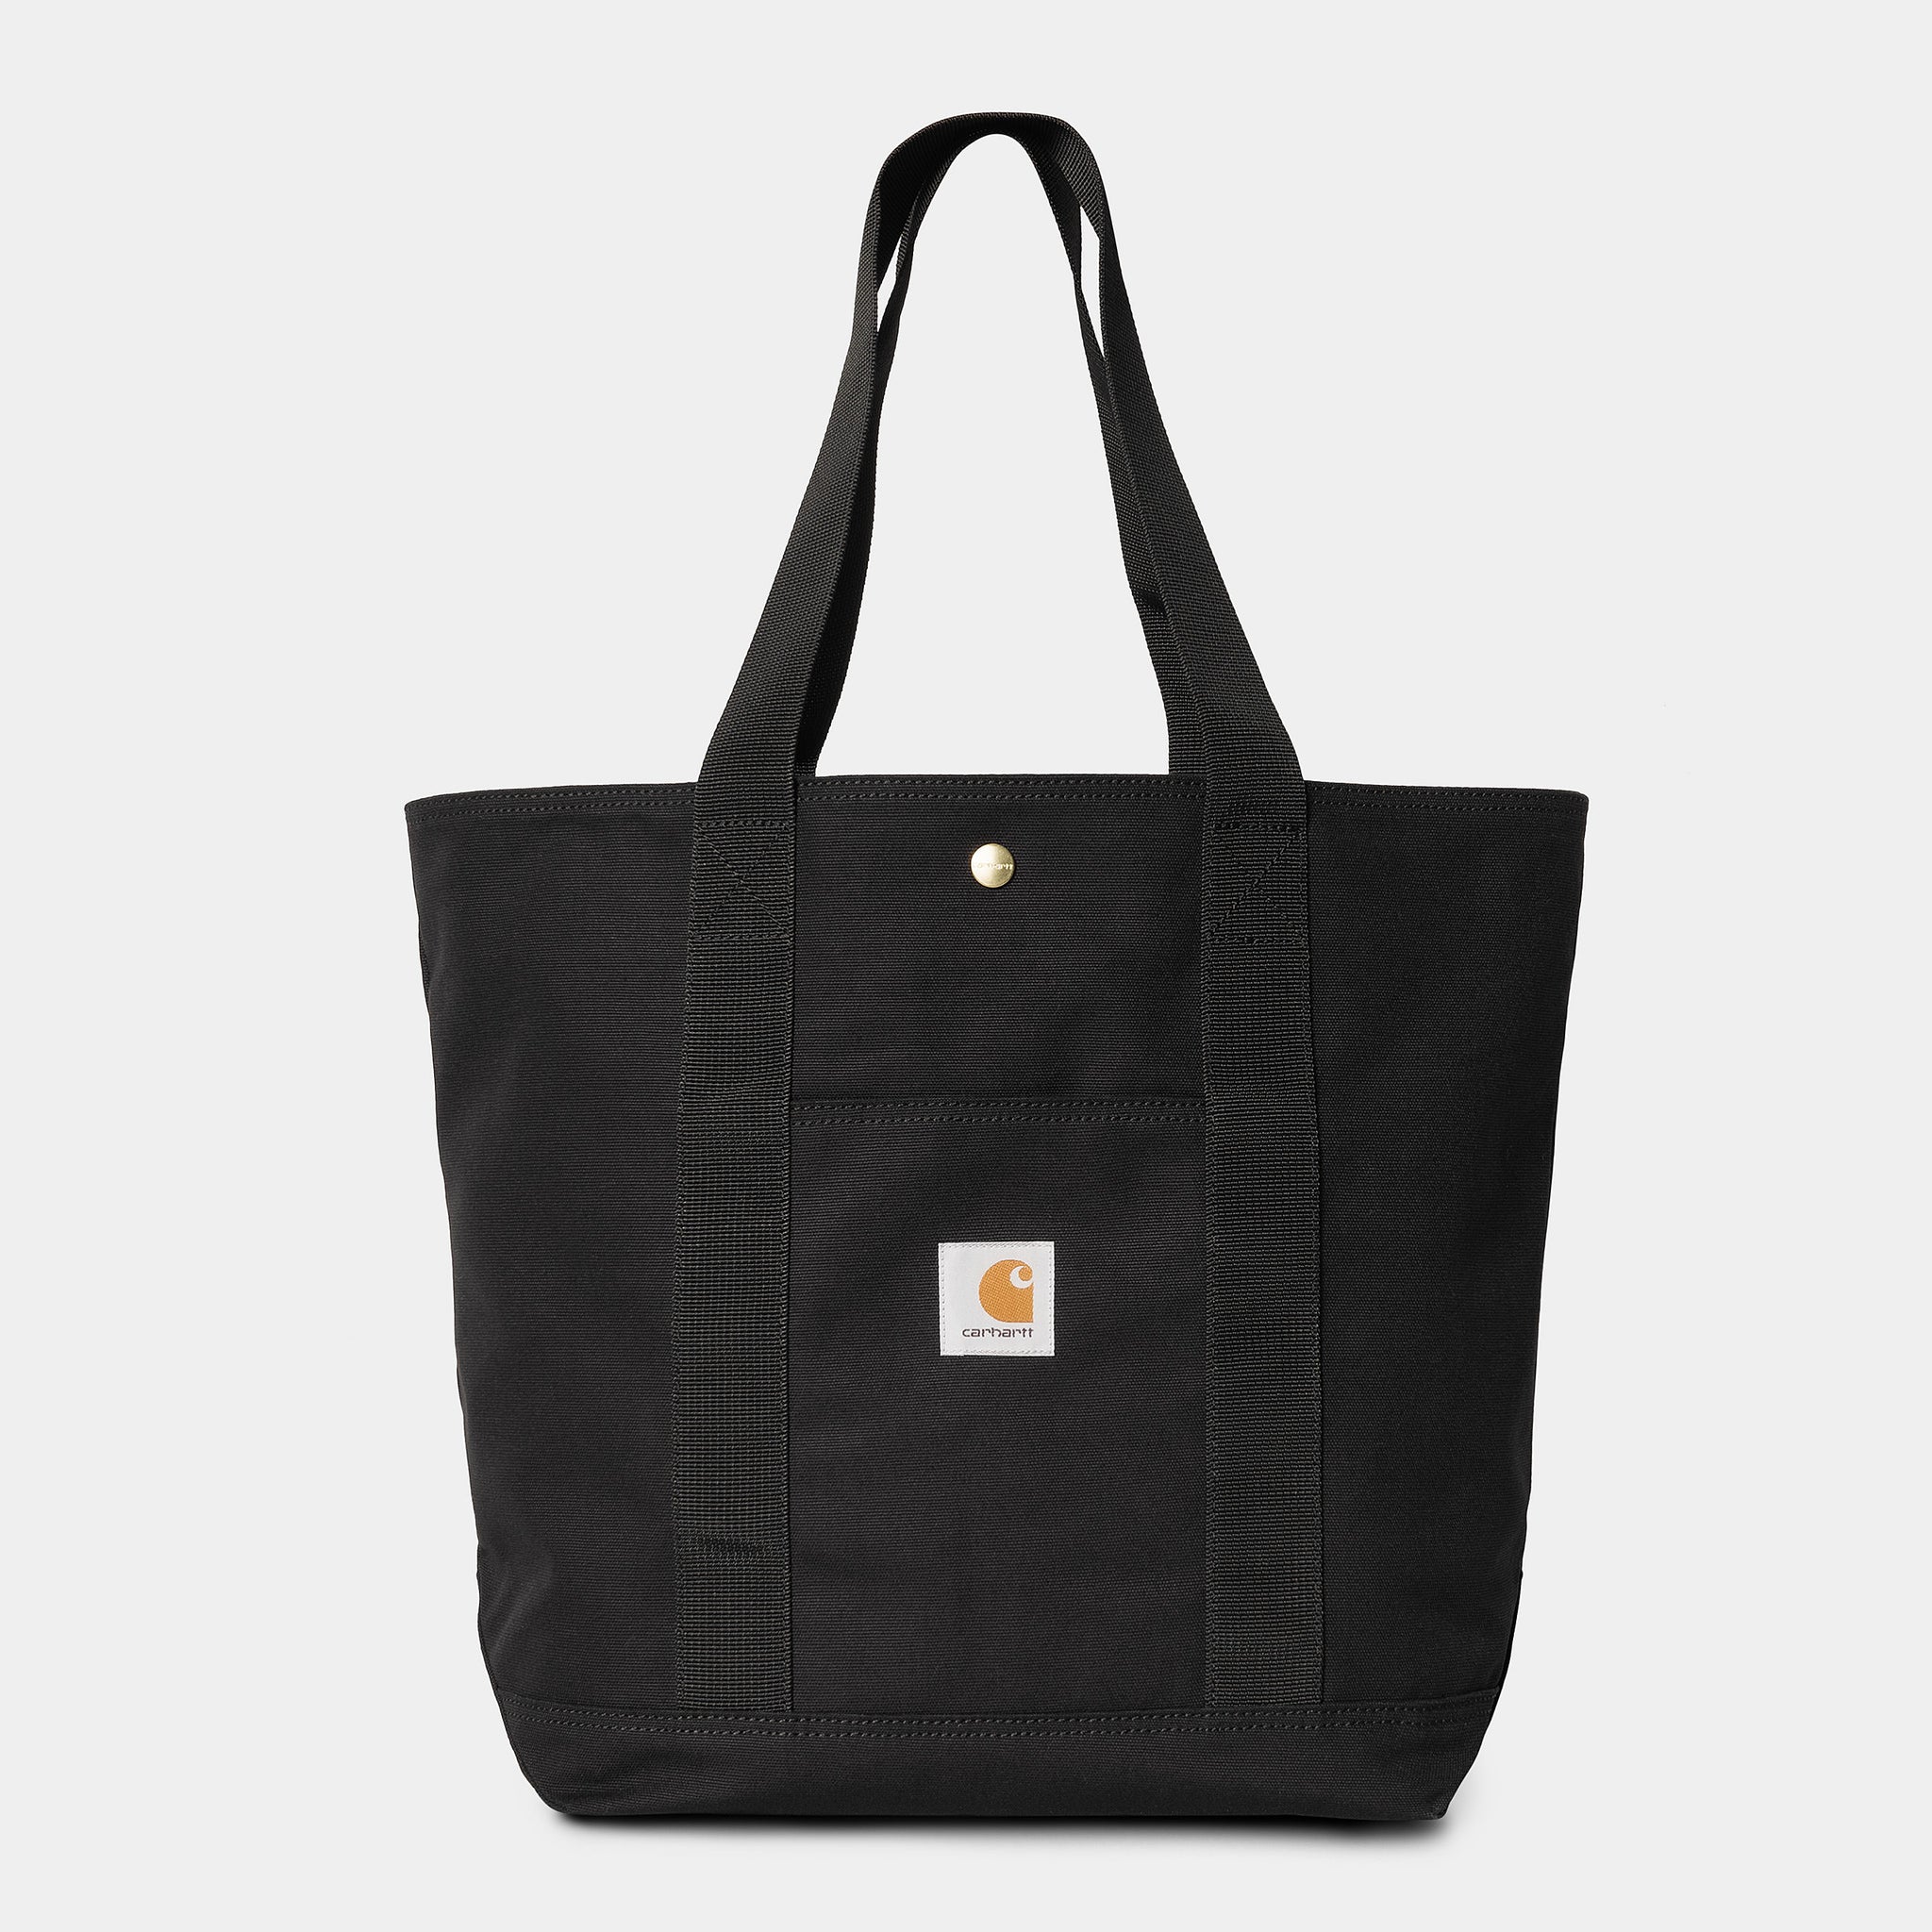 Carhartt WIP Canvas Tote Dearborn Canvas Black Rinsed